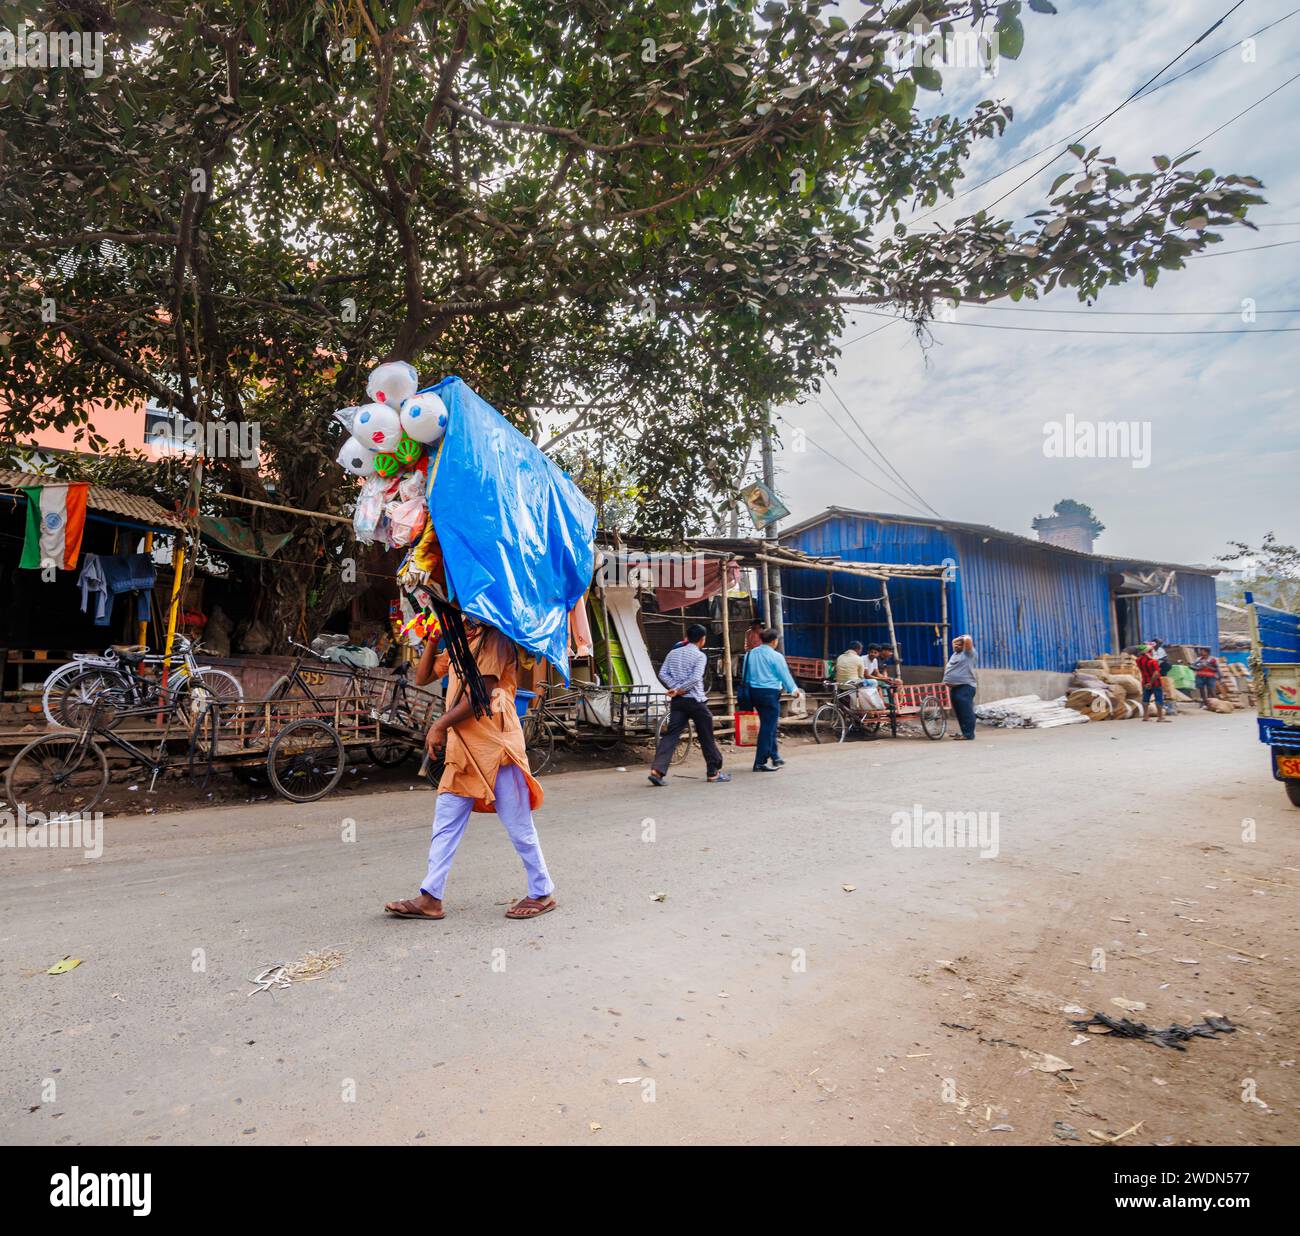 Local lifestyle: a local man walking in the street (Strand Bank Road) selling toys in Kolkata (Calcutta), West Bengal, India Stock Photo